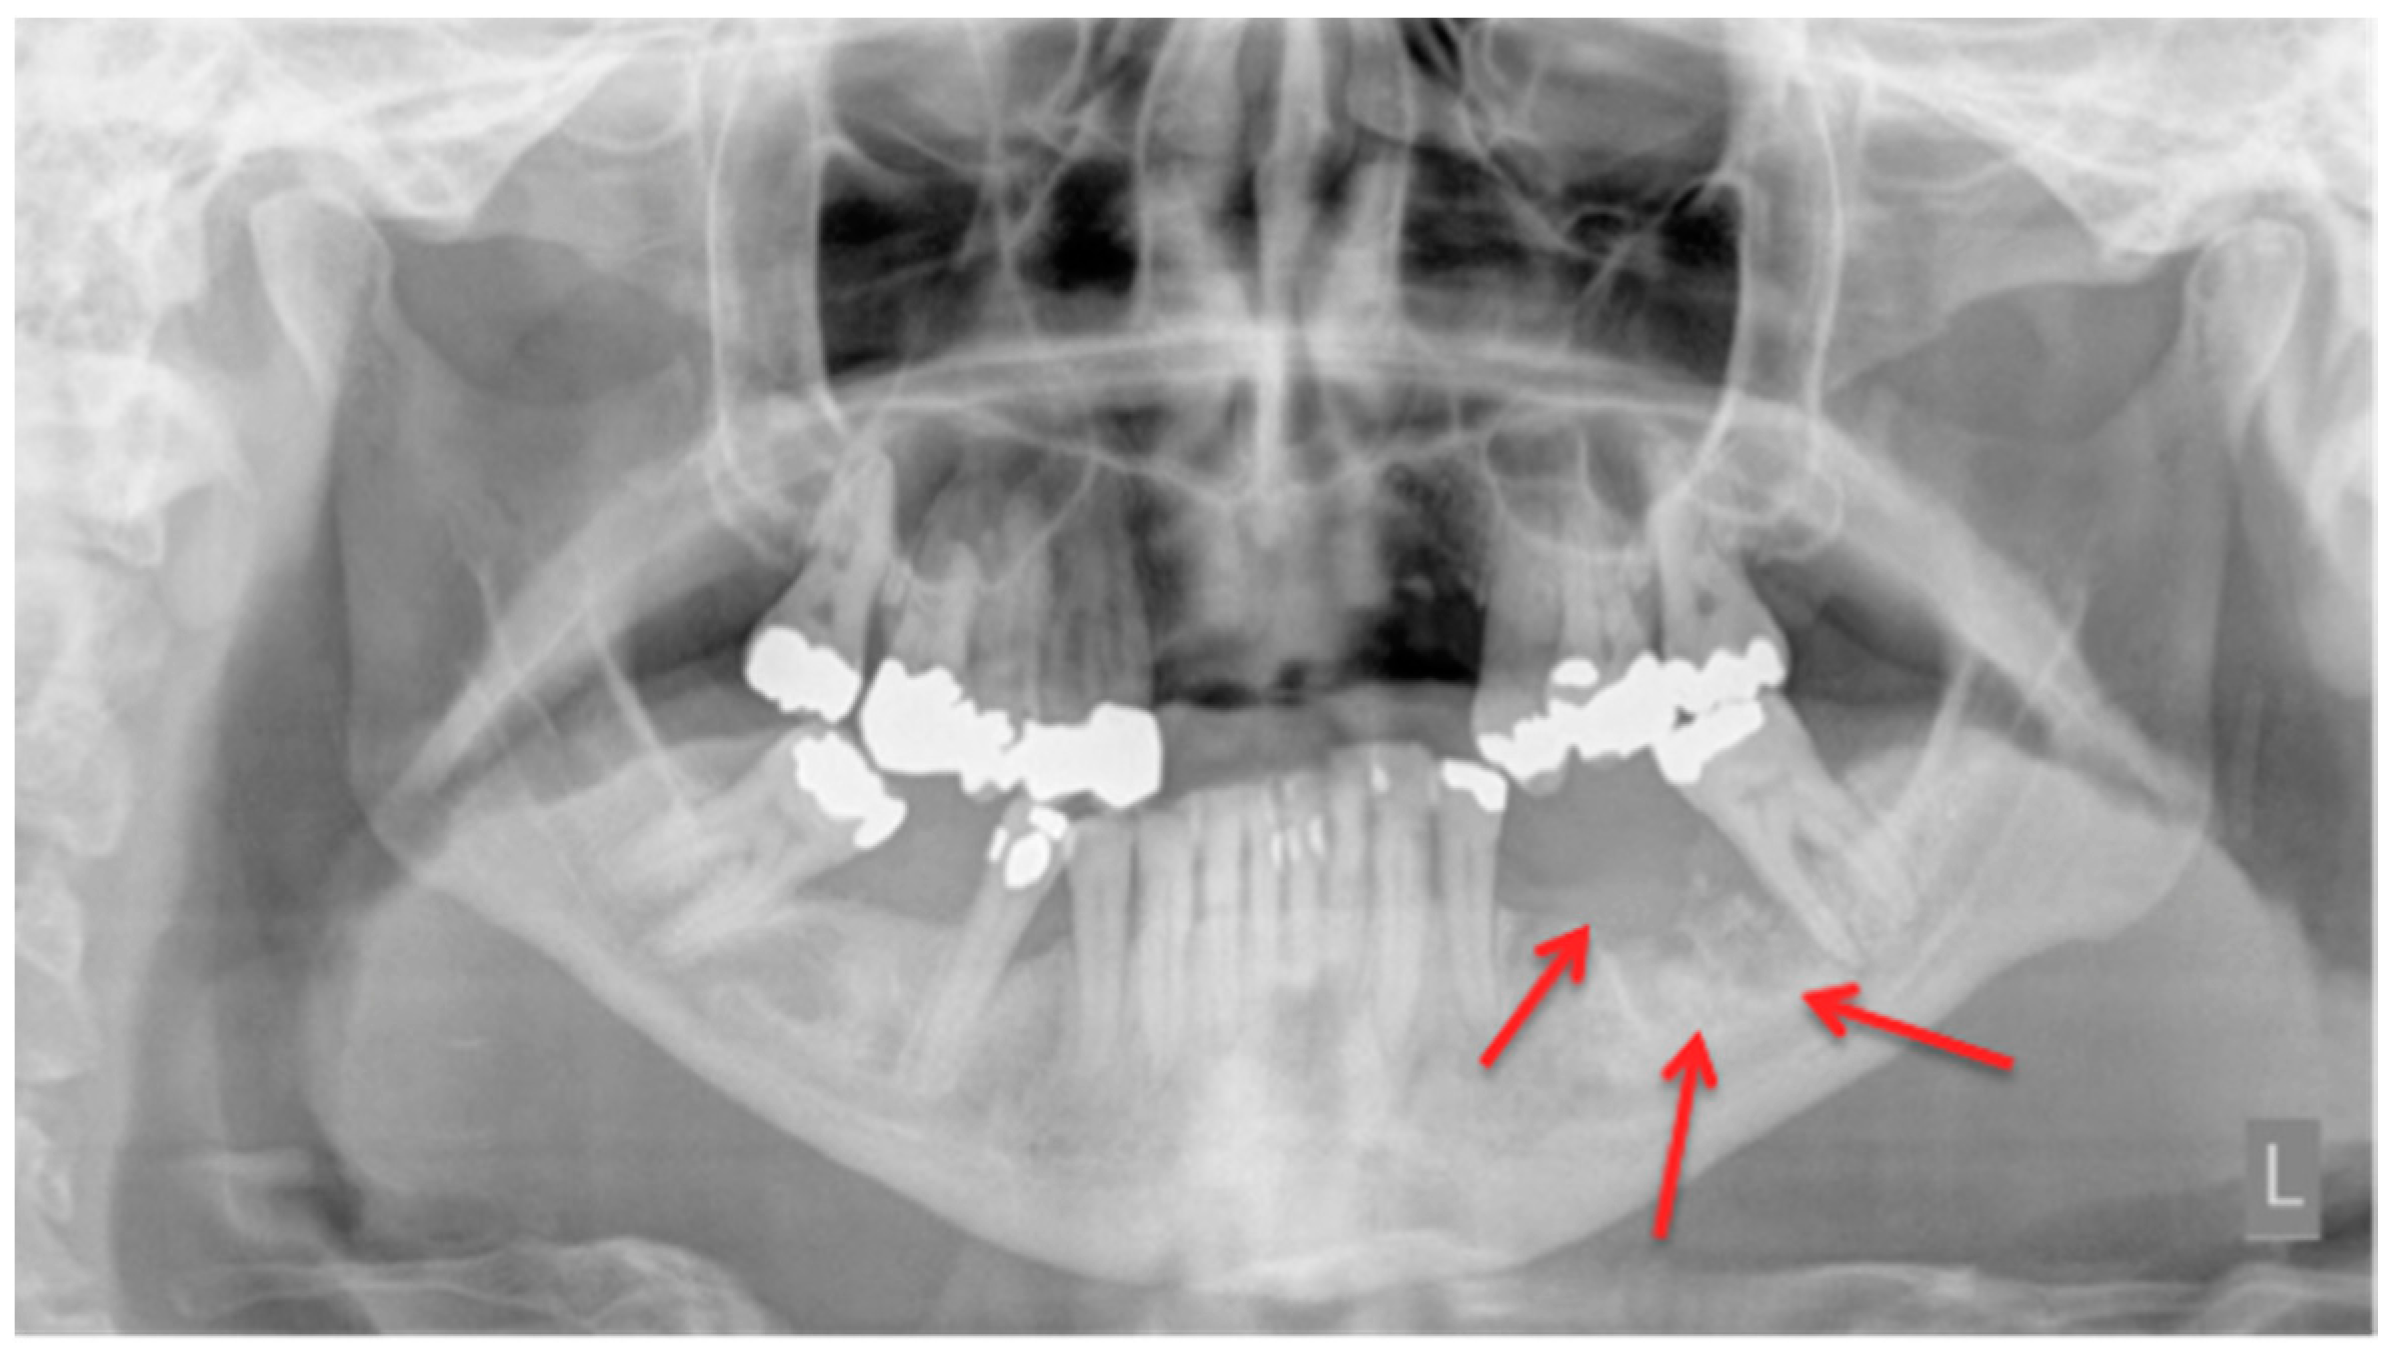 bisphosphonate associated osteonecrosis of the jaw